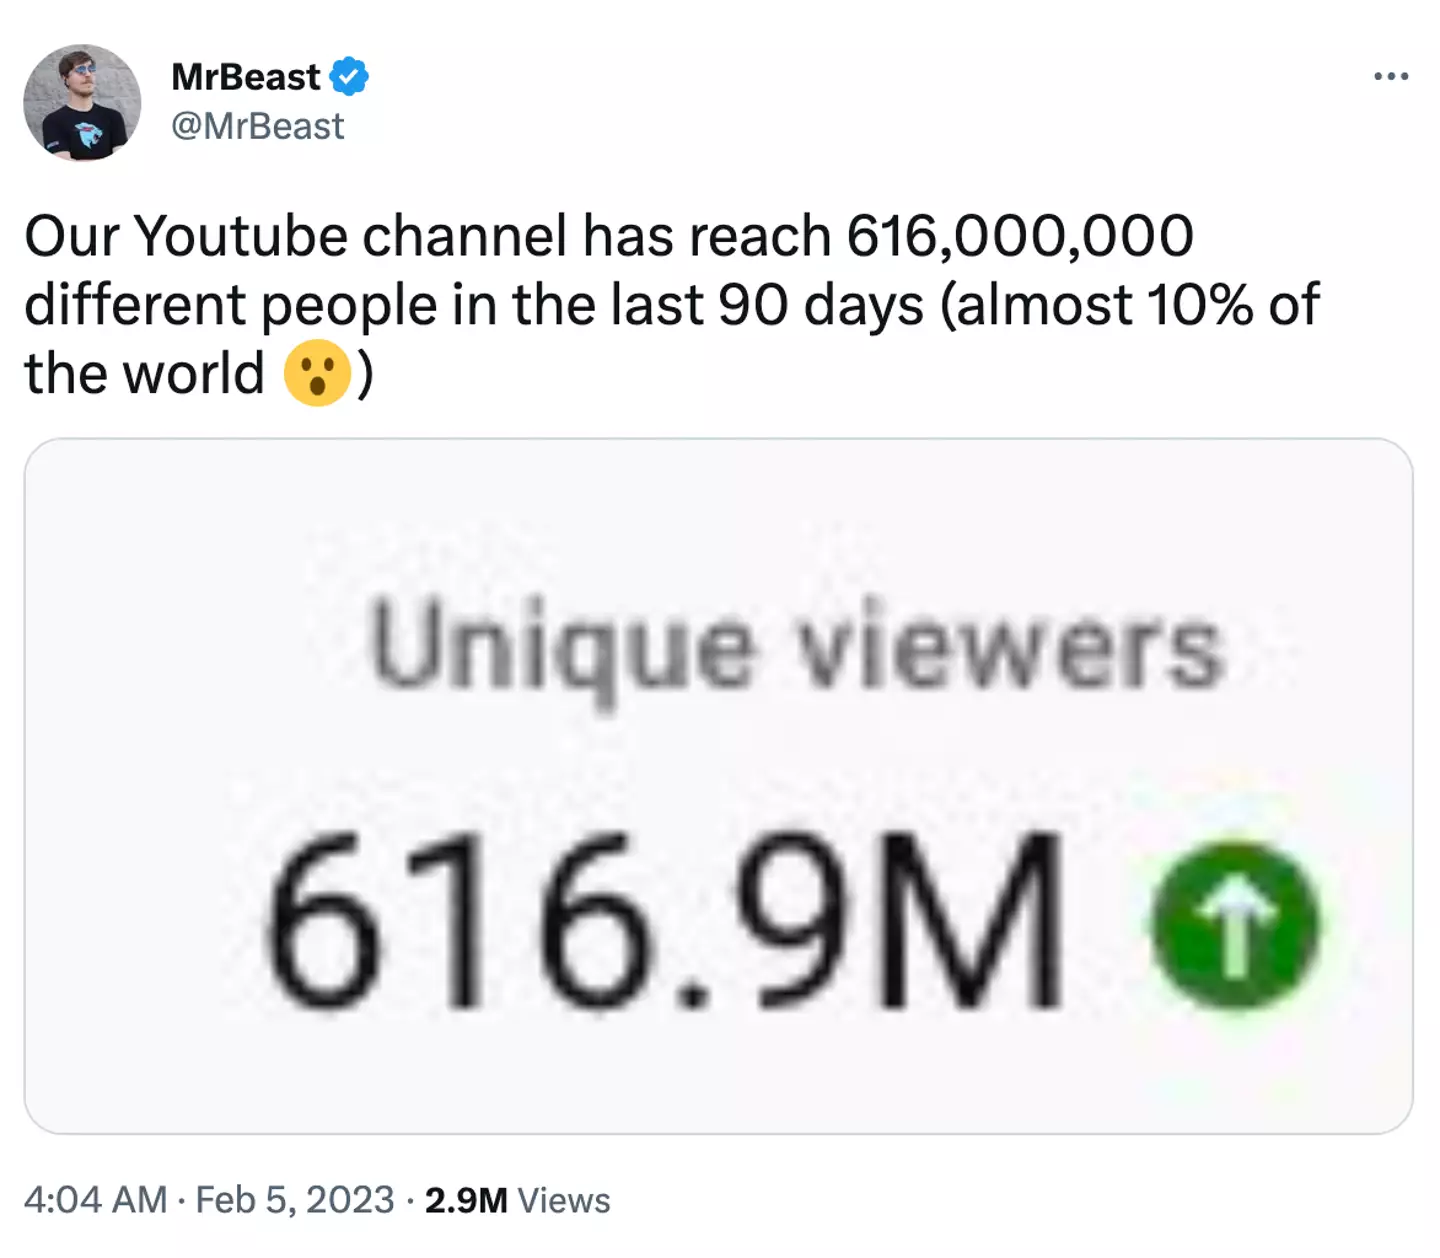 Almost 10 per cent of the world has watched MrBeast's channel.